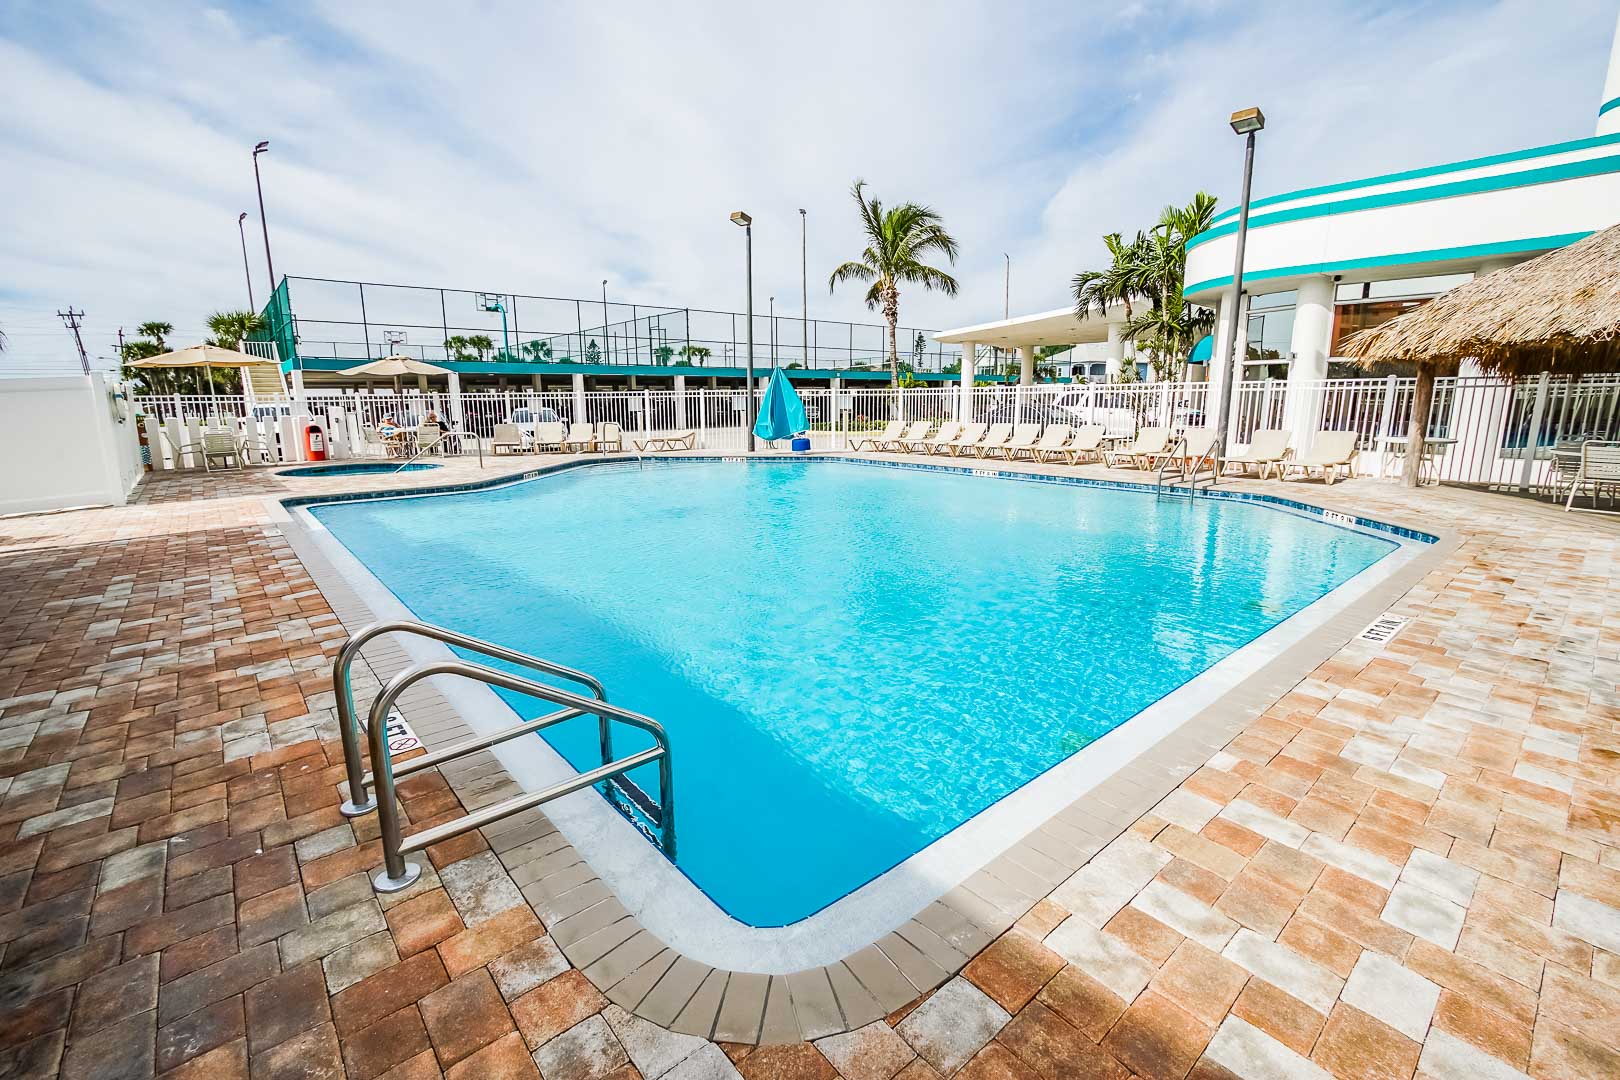 A spacious outdoor swimming pool at VRI's Discovery Beach Resort in Cocoa Beach, Florida.